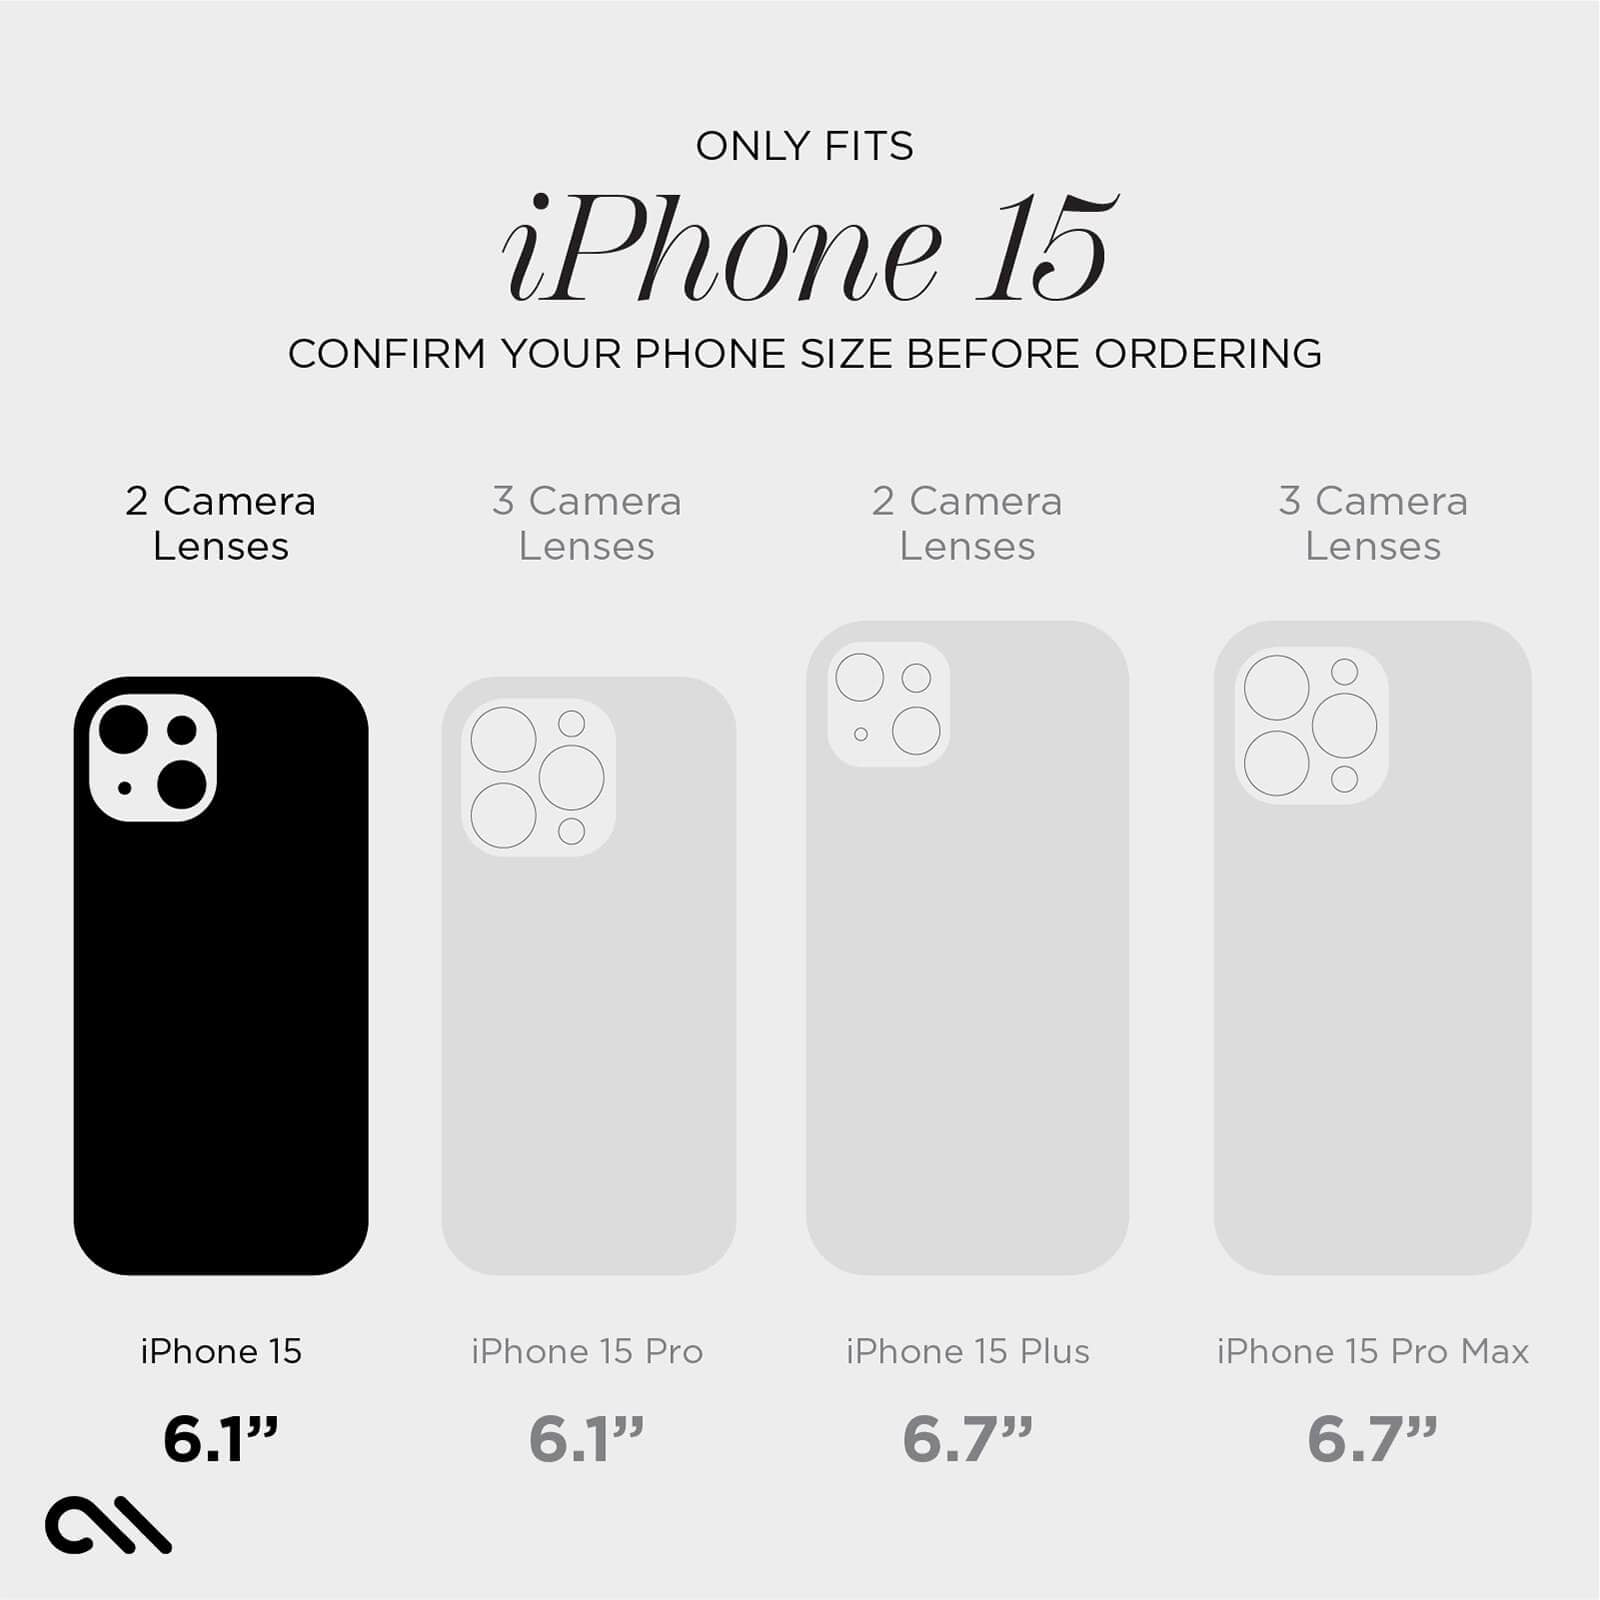 ONLY FITS IPHONE 15. CONFIRM YOUR PHONE SIZE BEFORE ORDERING. 